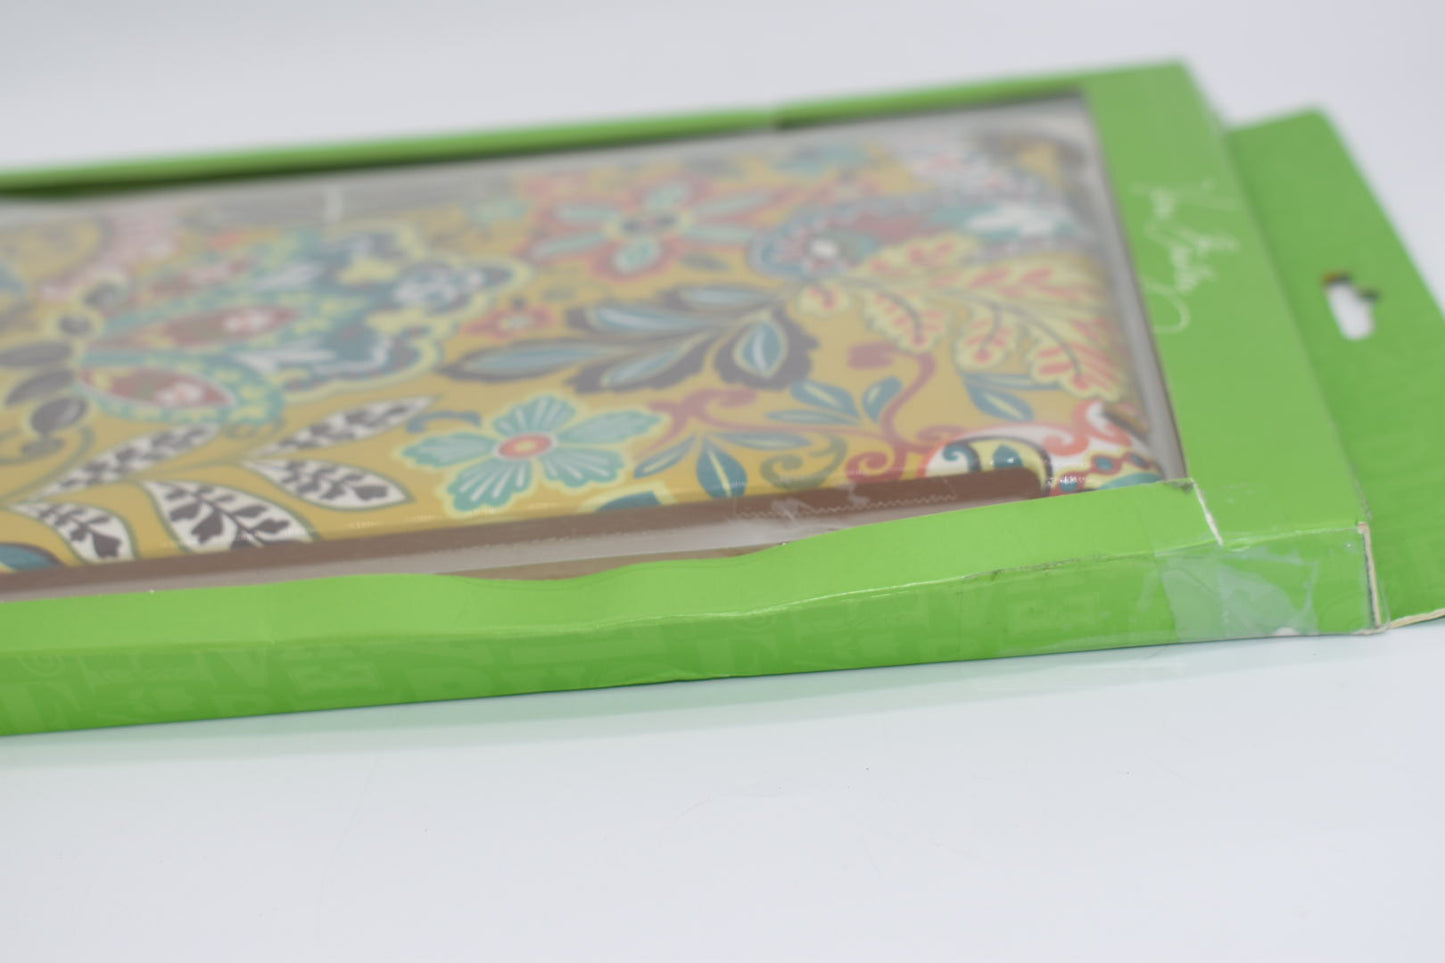 Vera Bradley Snap-On Case for iPad 2/ iPad 3 in "Provencal" Pattern